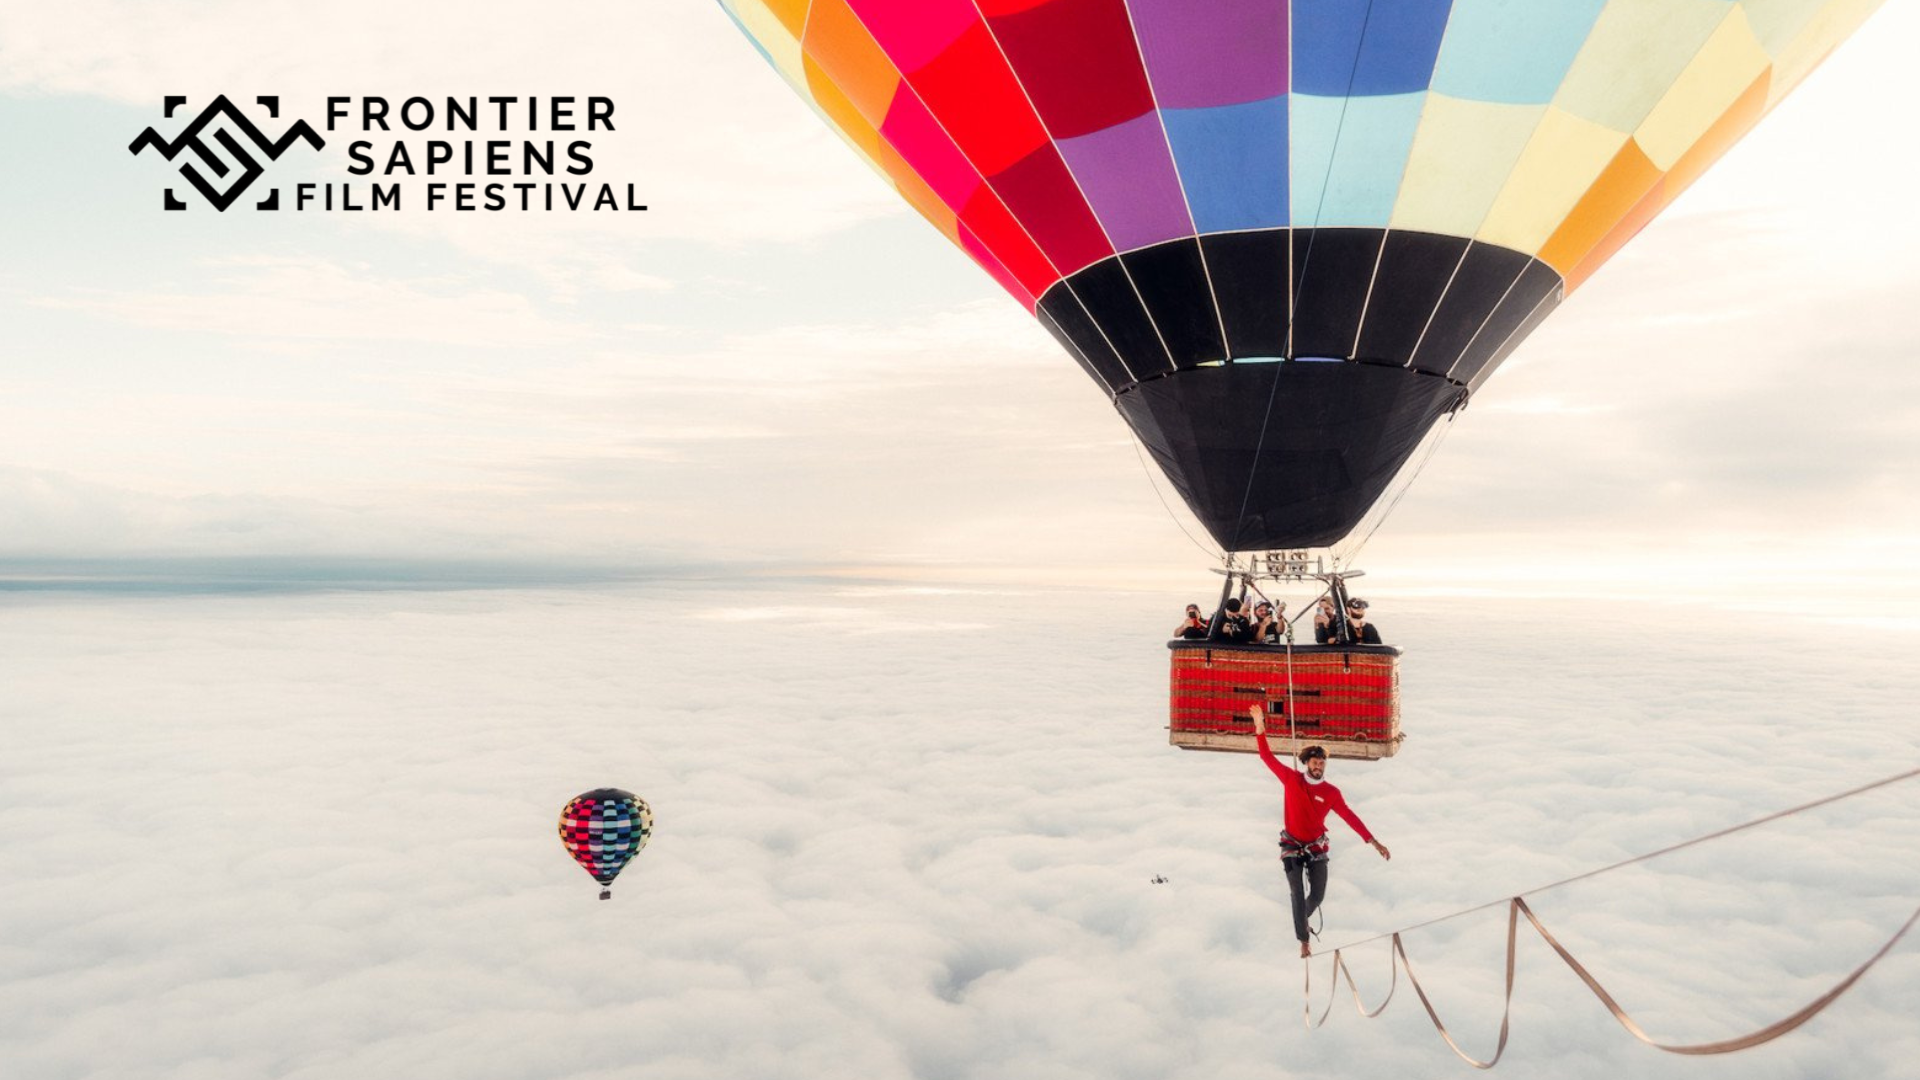 A hot air balloon floats above the clouds as a man walks across a tightrope that is being suspended from the balloon. The Frontier Sapiens Film Festival can be seen. 